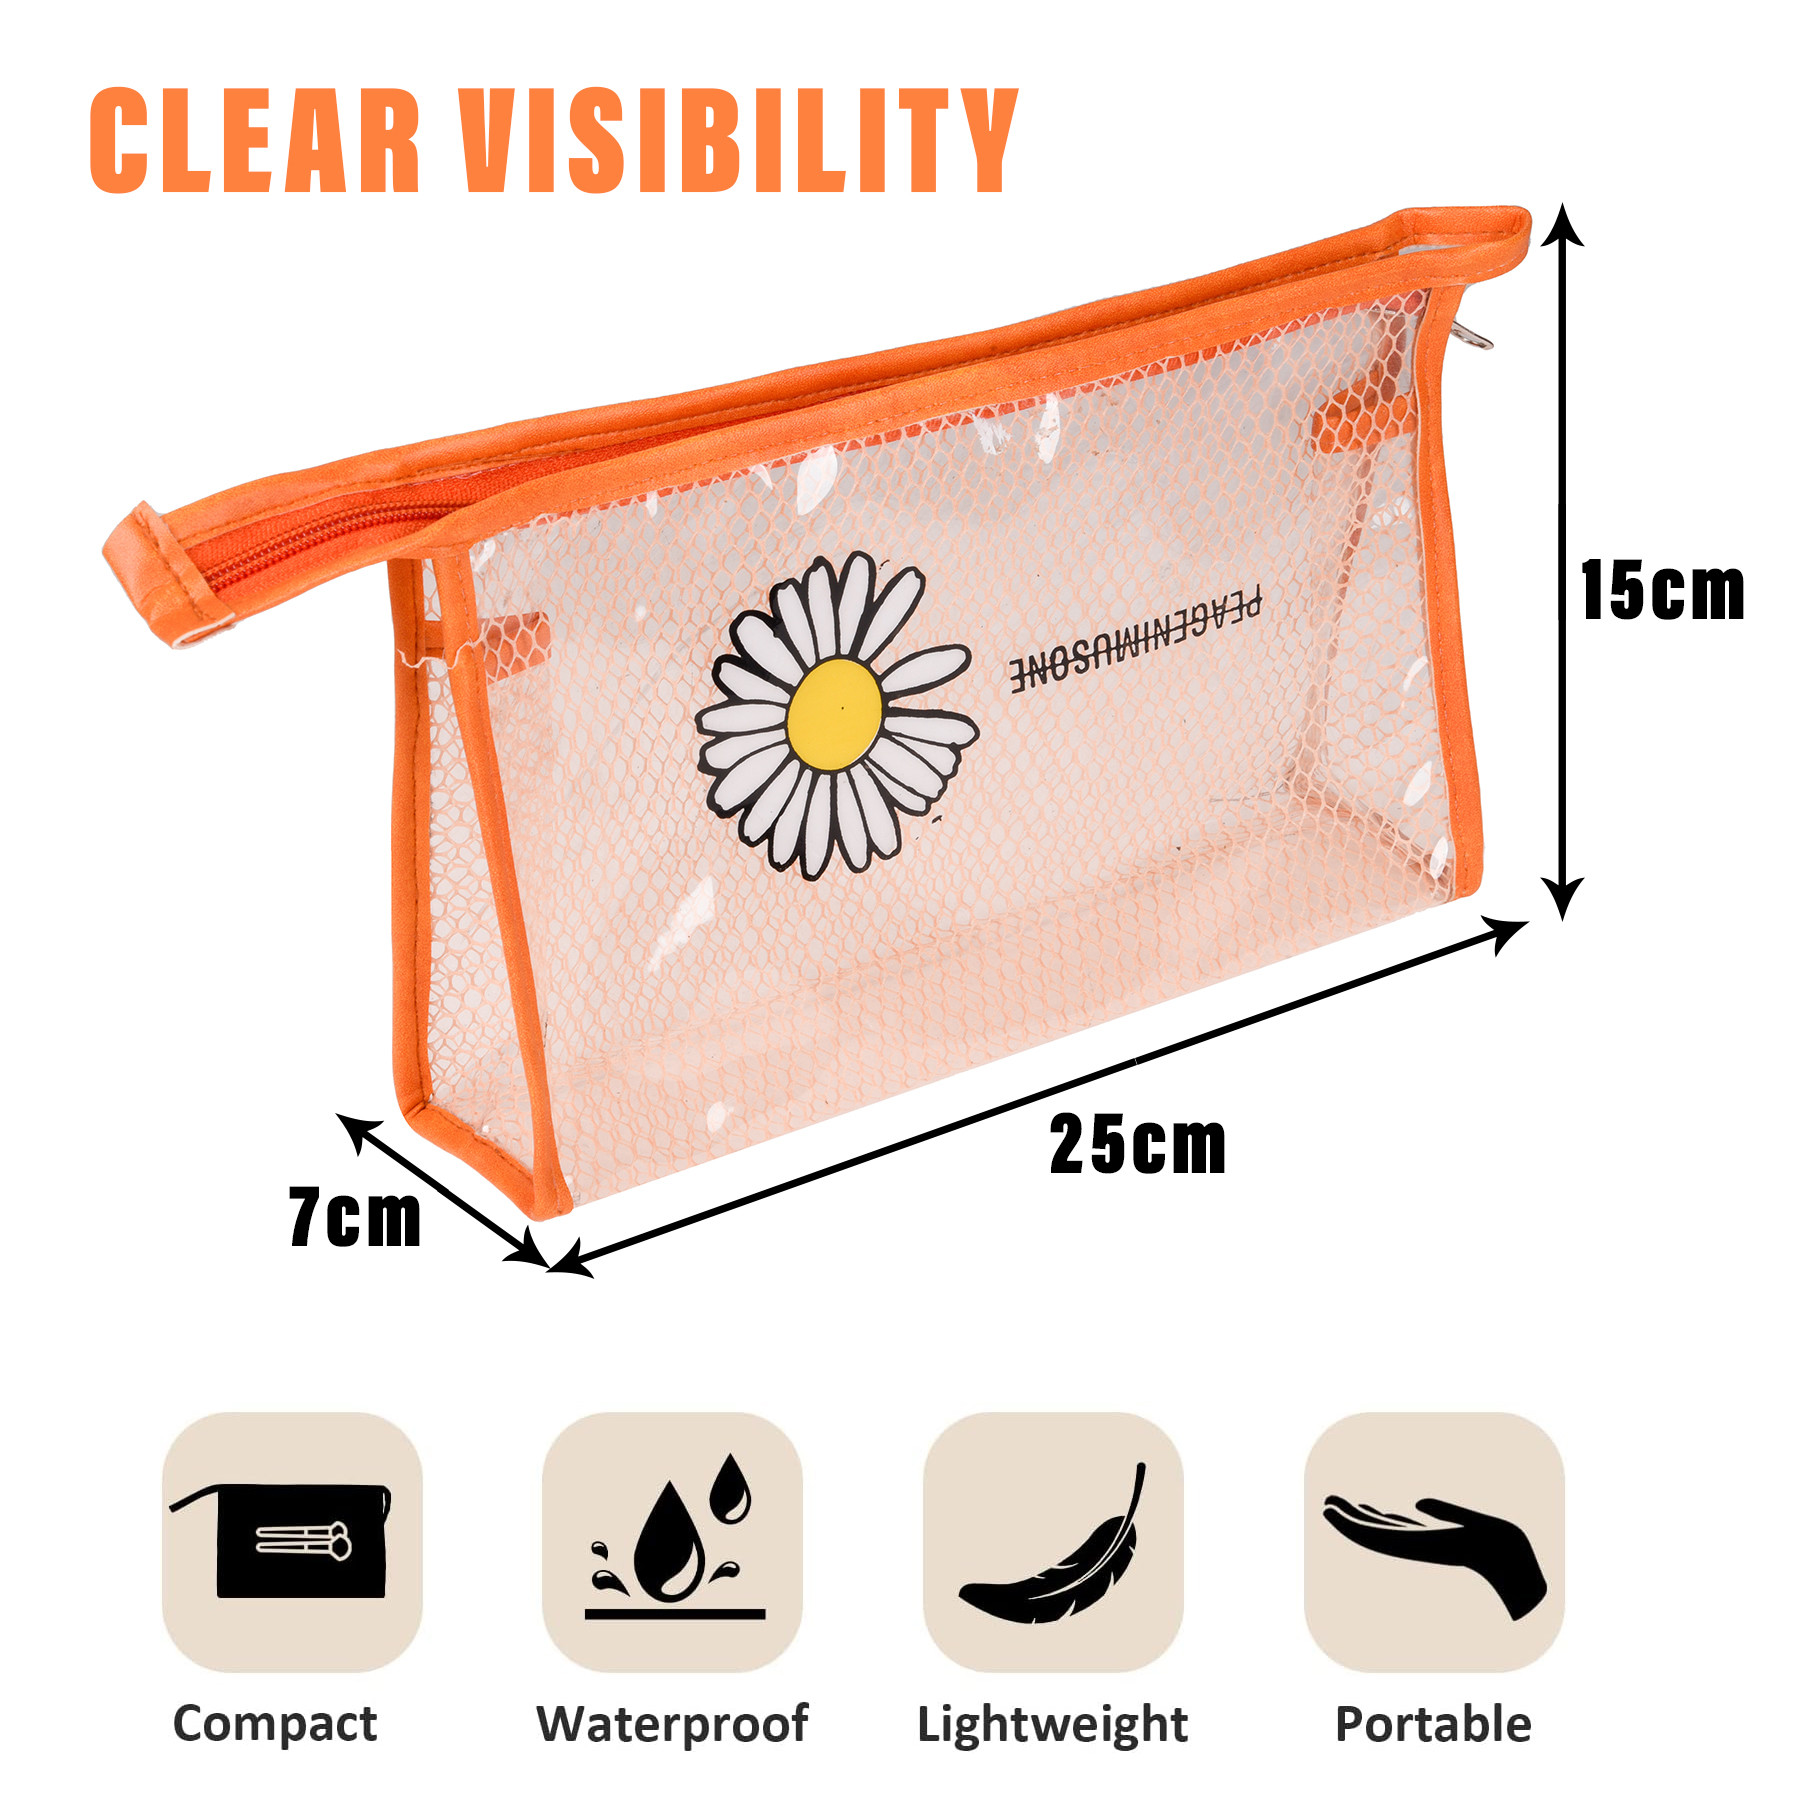 Kuber Industries Toiletry Pouch | Cosmetic Makeup Pouch | Vanity Pouch for Woman | Makeup Accessories Pouch | Transparent Net Pouch | Sunflower-Cosmetic Pouch | Orange